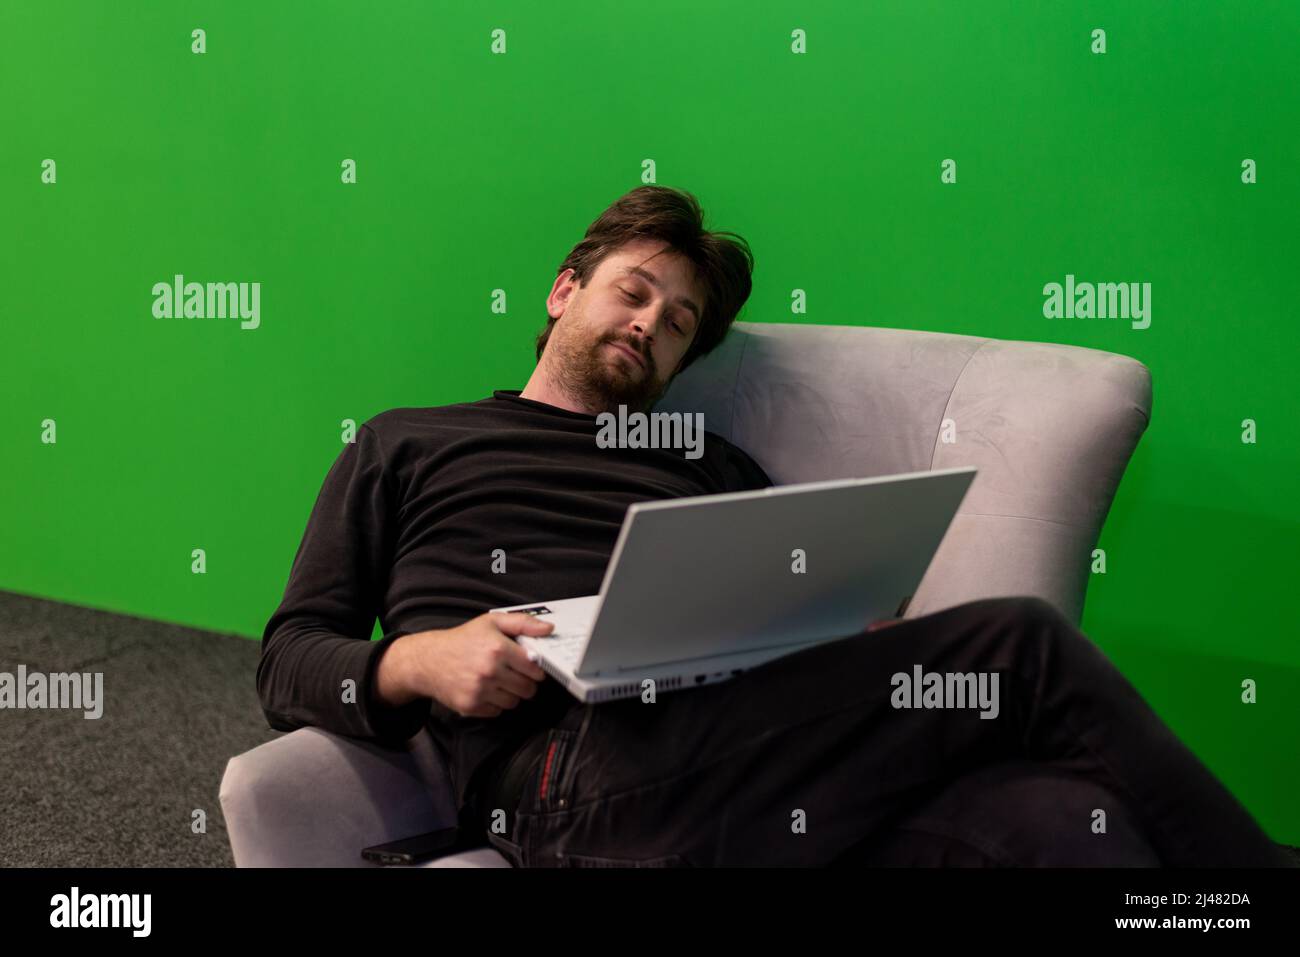 Tired man reading emails on laptop on green screen Stock Photo